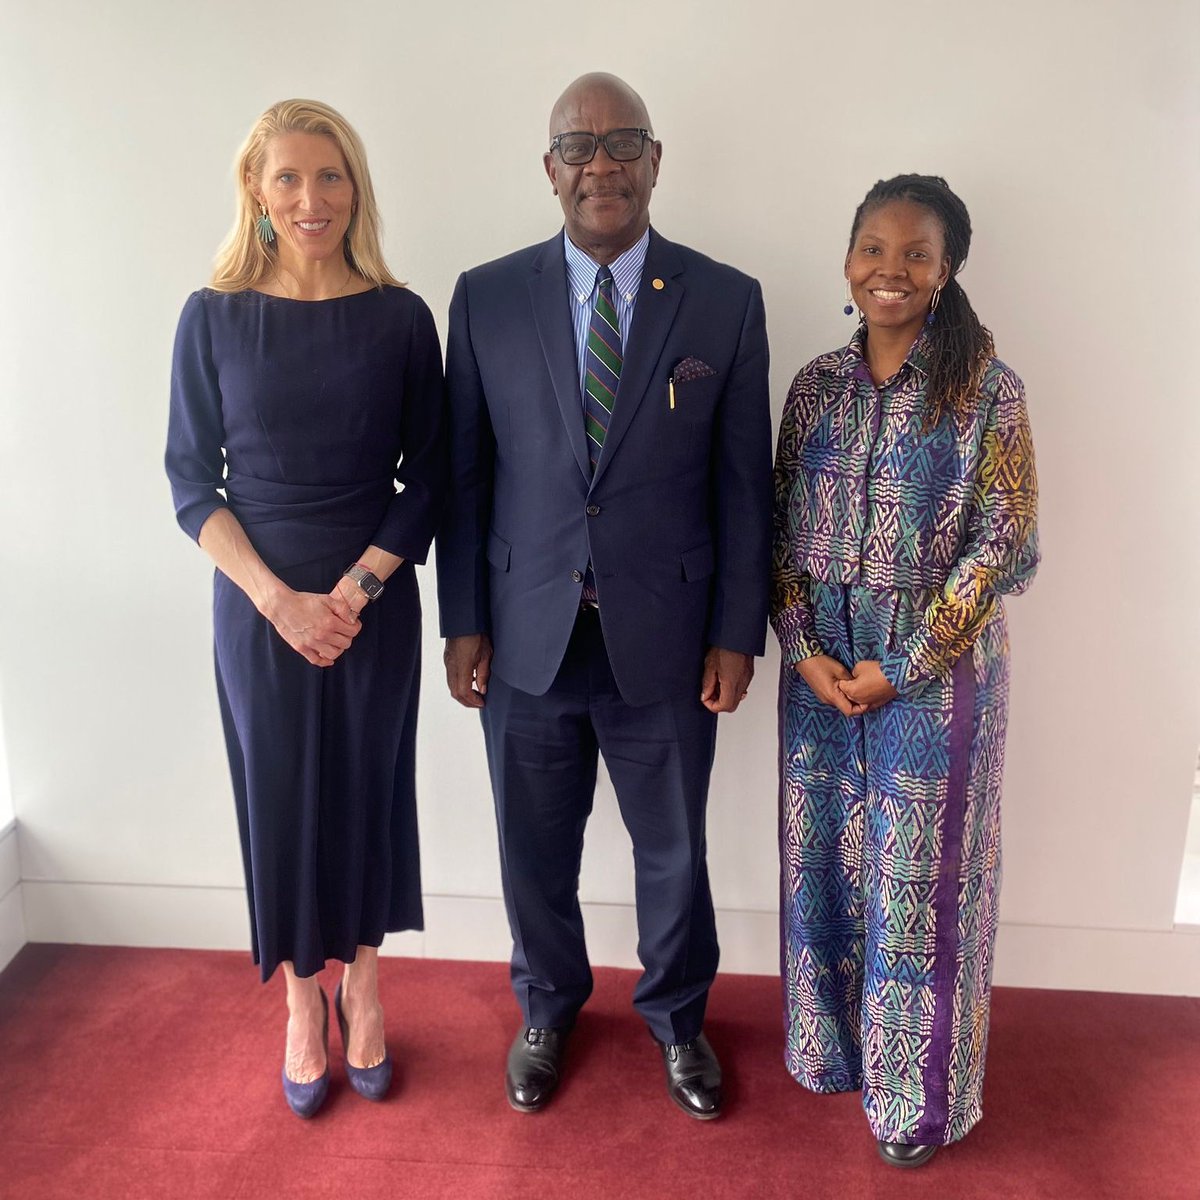 Great to catch up with Sierra Leone Minister of Health @DembyAustin and Deputy Minister Dr. Jalikatu Mustapha during the @HarvardGH's #HGHi2024 event today and discuss our shared partnership.